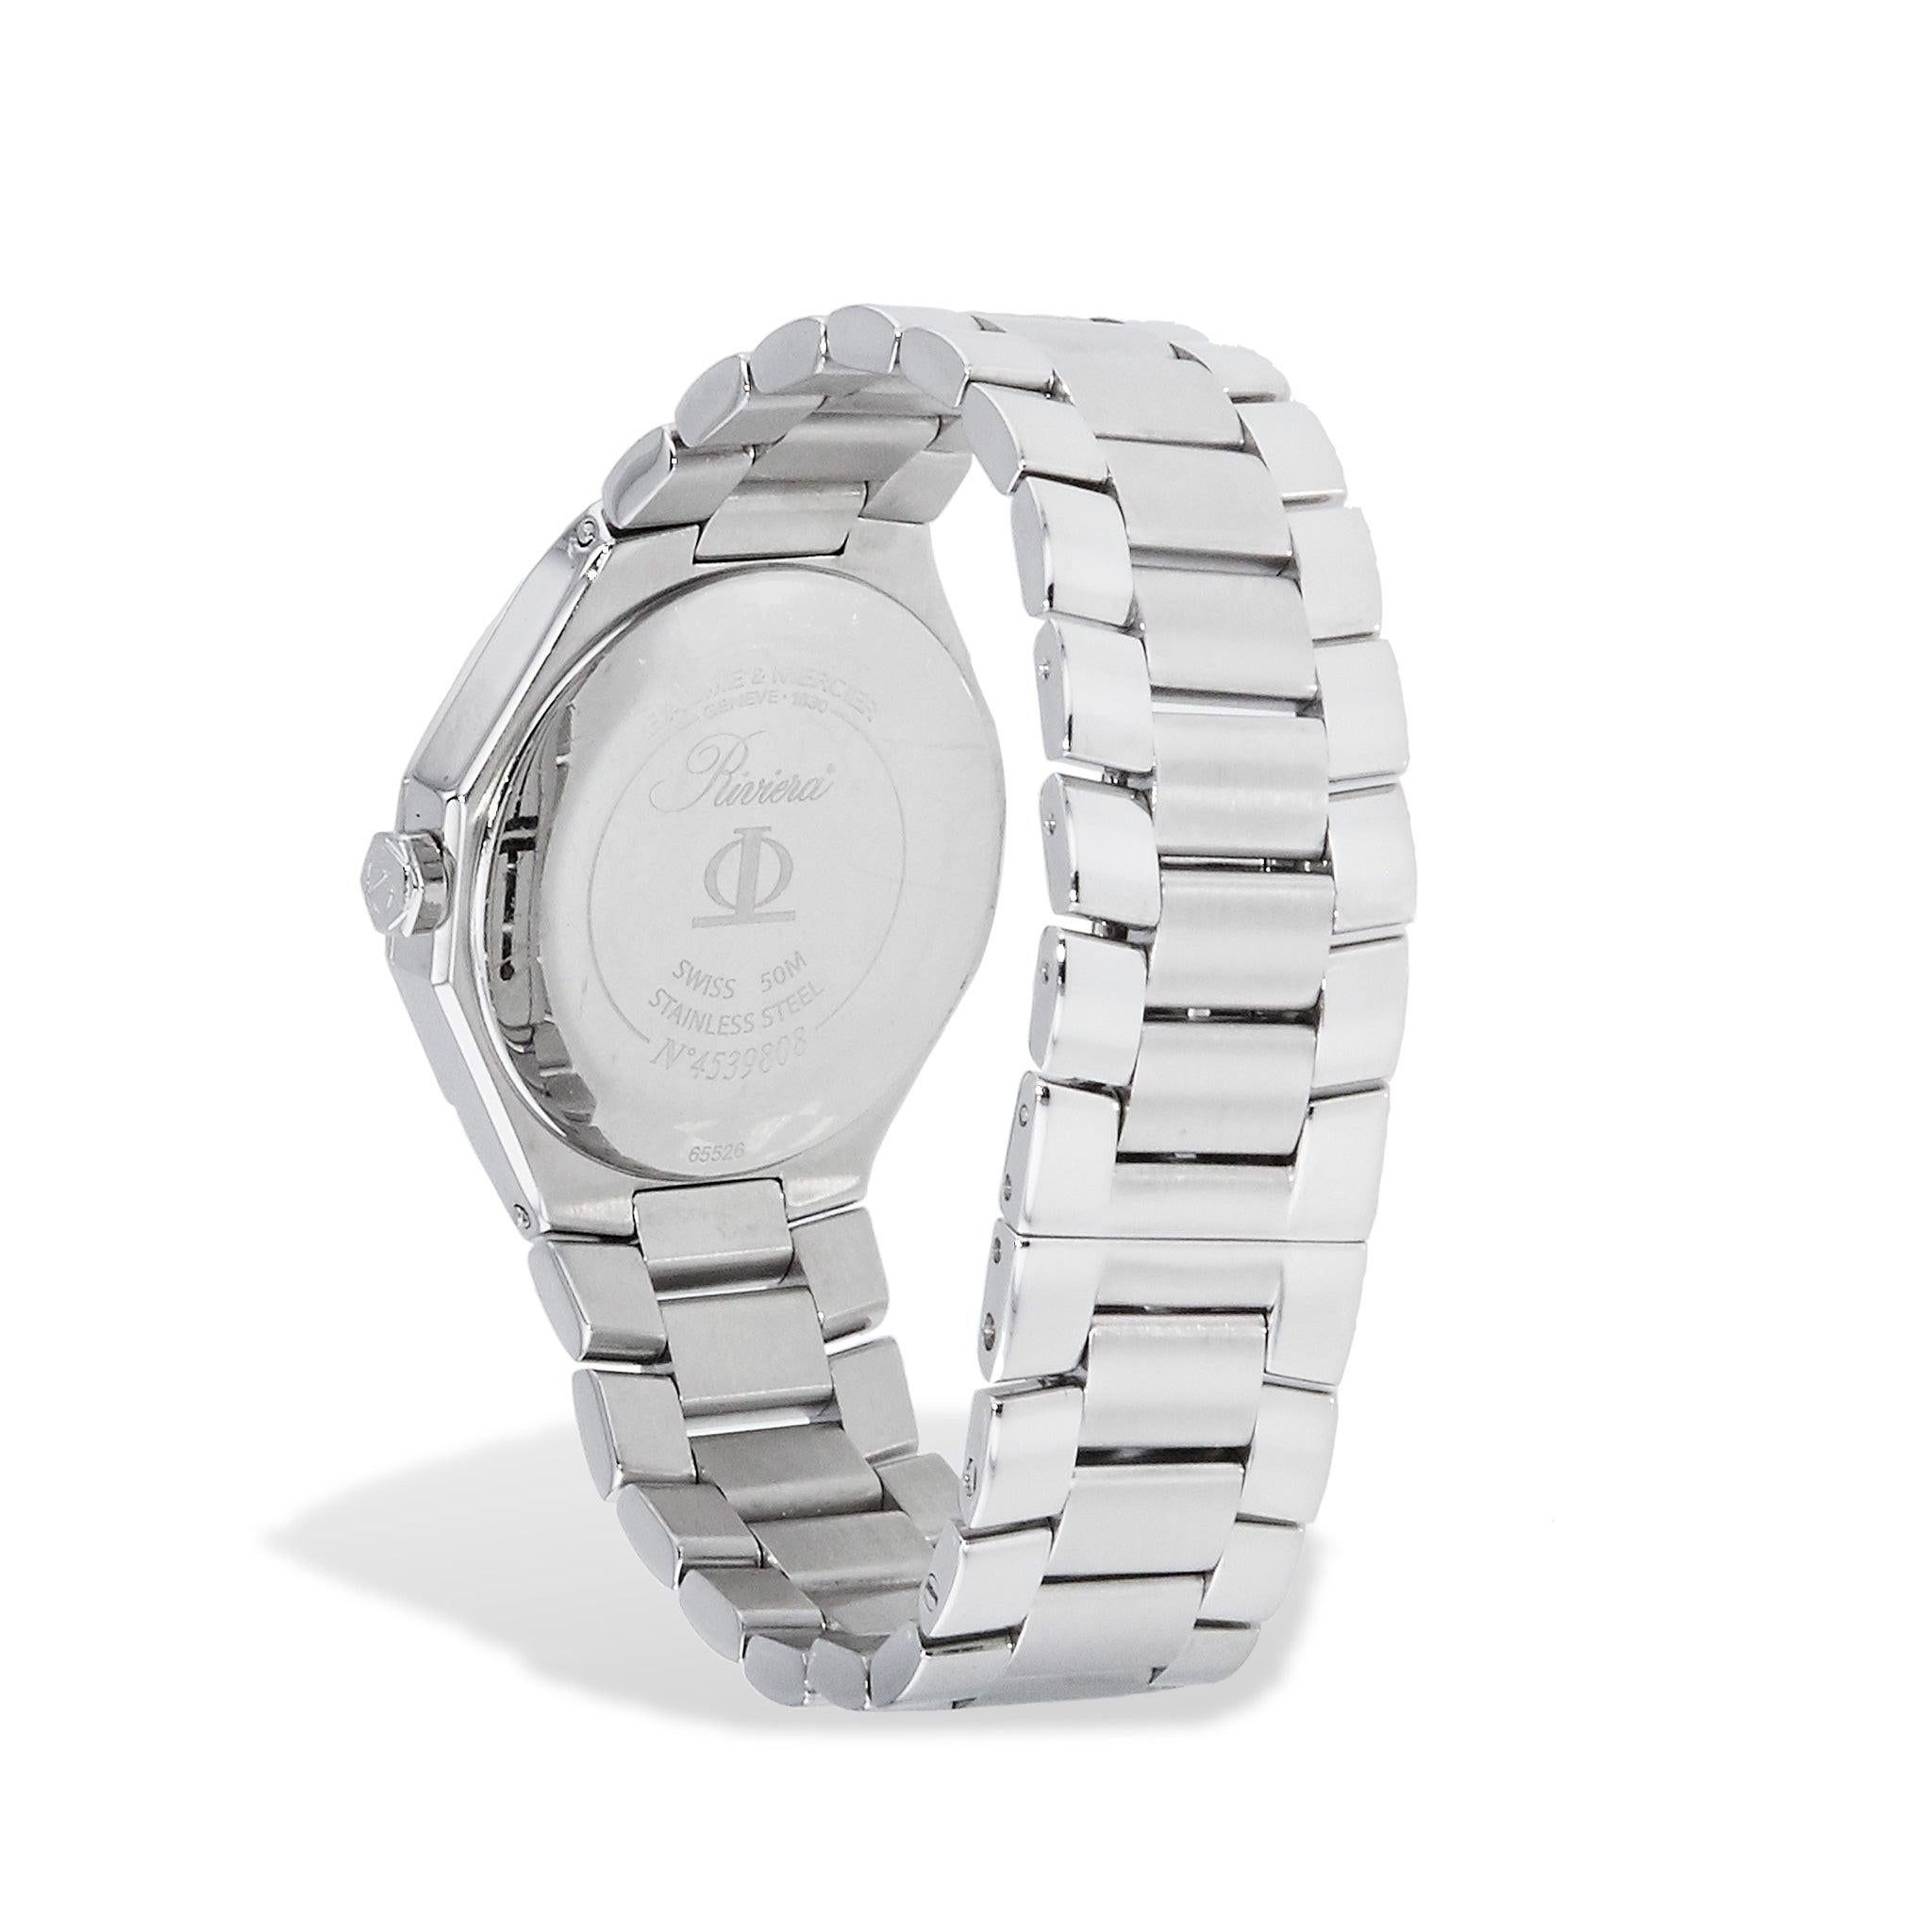 The Estate Collection Baume & Mercier Riviera Watch, model 65526, features a mother of pearl & diamond bezel, scratch-resistant sapphire crystal, stainless steel construction, and quartz movement.
 
Estate Collection Baume & Mercier Riviera